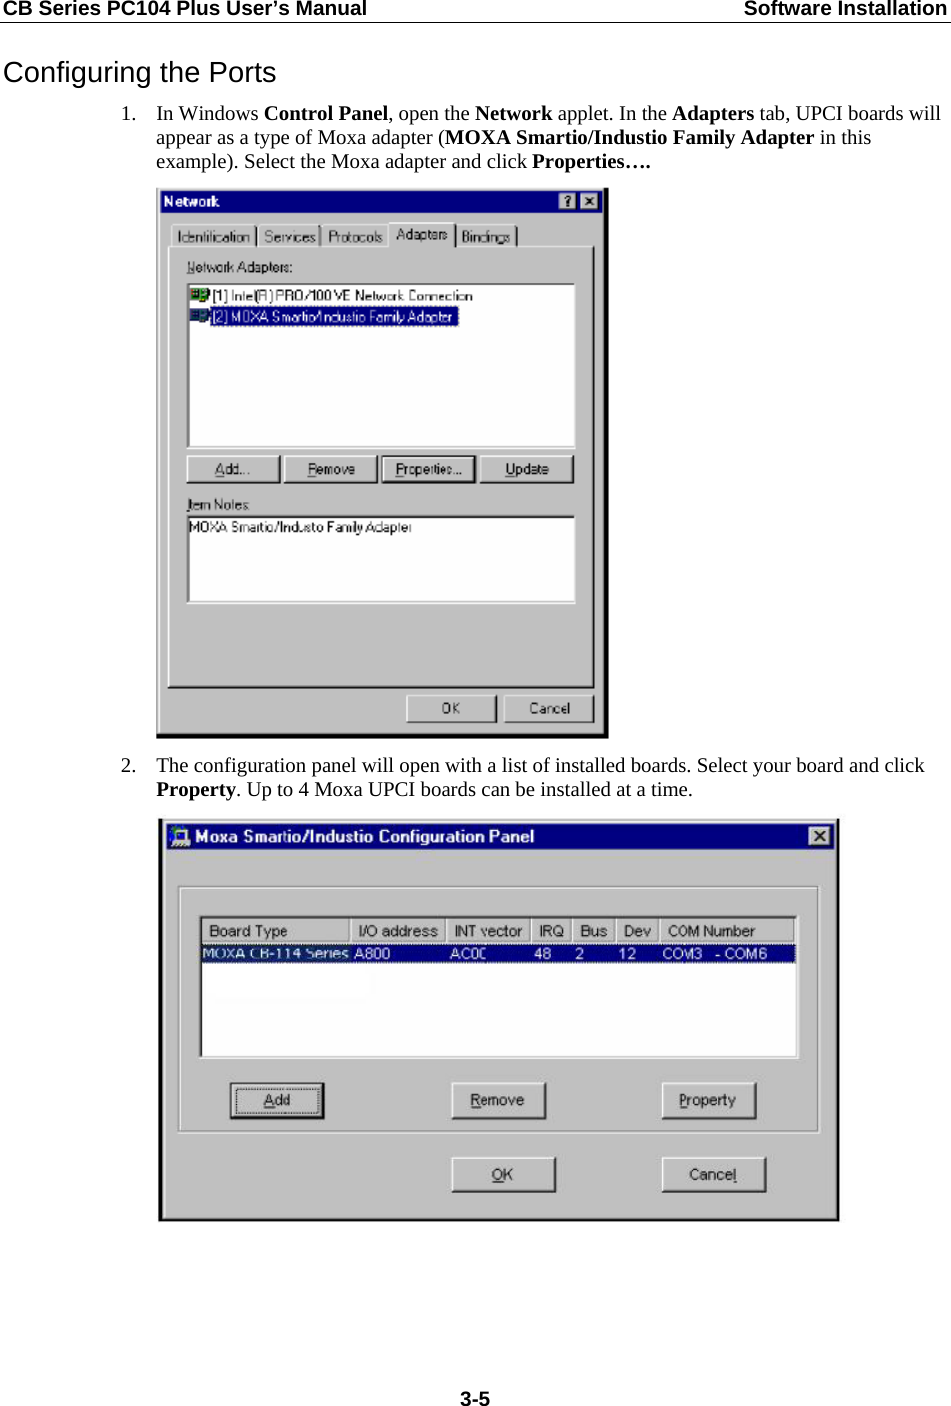 CB Series PC104 Plus User’s Manual  Software Installation Configuring the Ports 1. In Windows Control Panel, open the Network applet. In the Adapters tab, UPCI boards will appear as a type of Moxa adapter (MOXA Smartio/Industio Family Adapter in this example). Select the Moxa adapter and click Properties….  2. The configuration panel will open with a list of installed boards. Select your board and click Property. Up to 4 Moxa UPCI boards can be installed at a time.   3-5